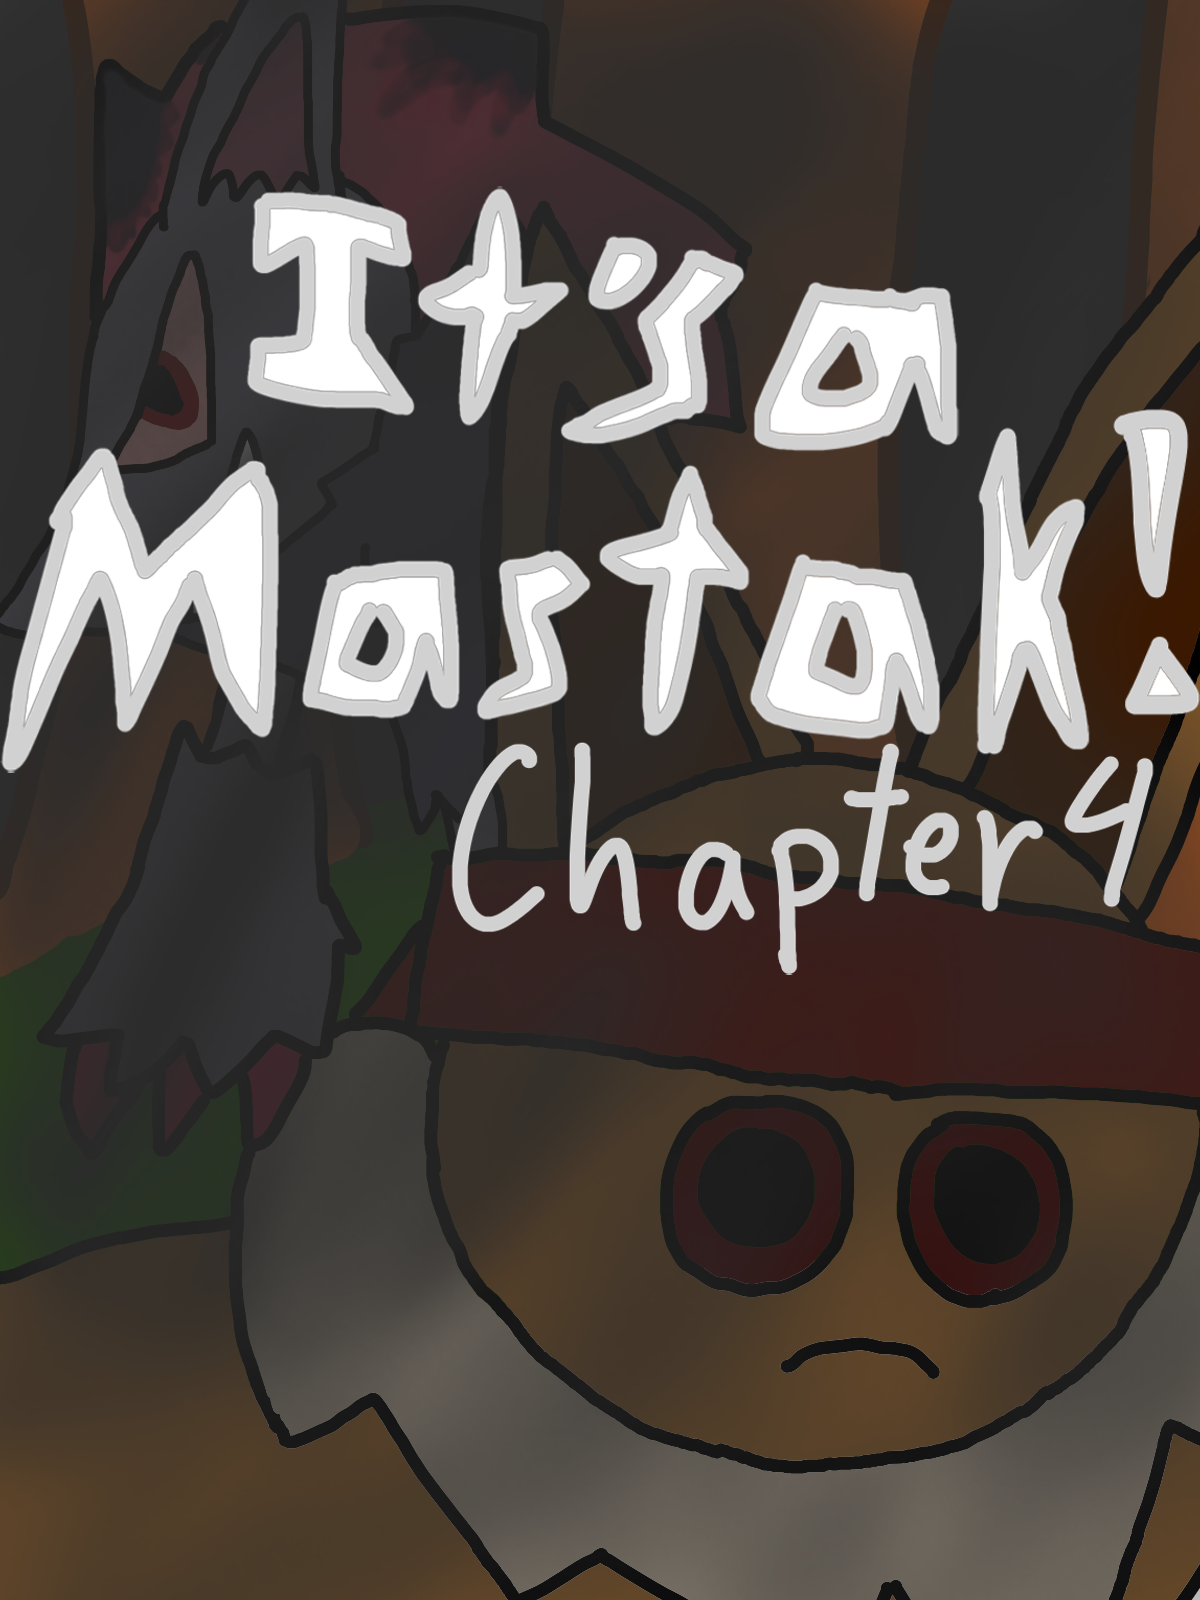 It's A Mistake Chapter 4 Cover